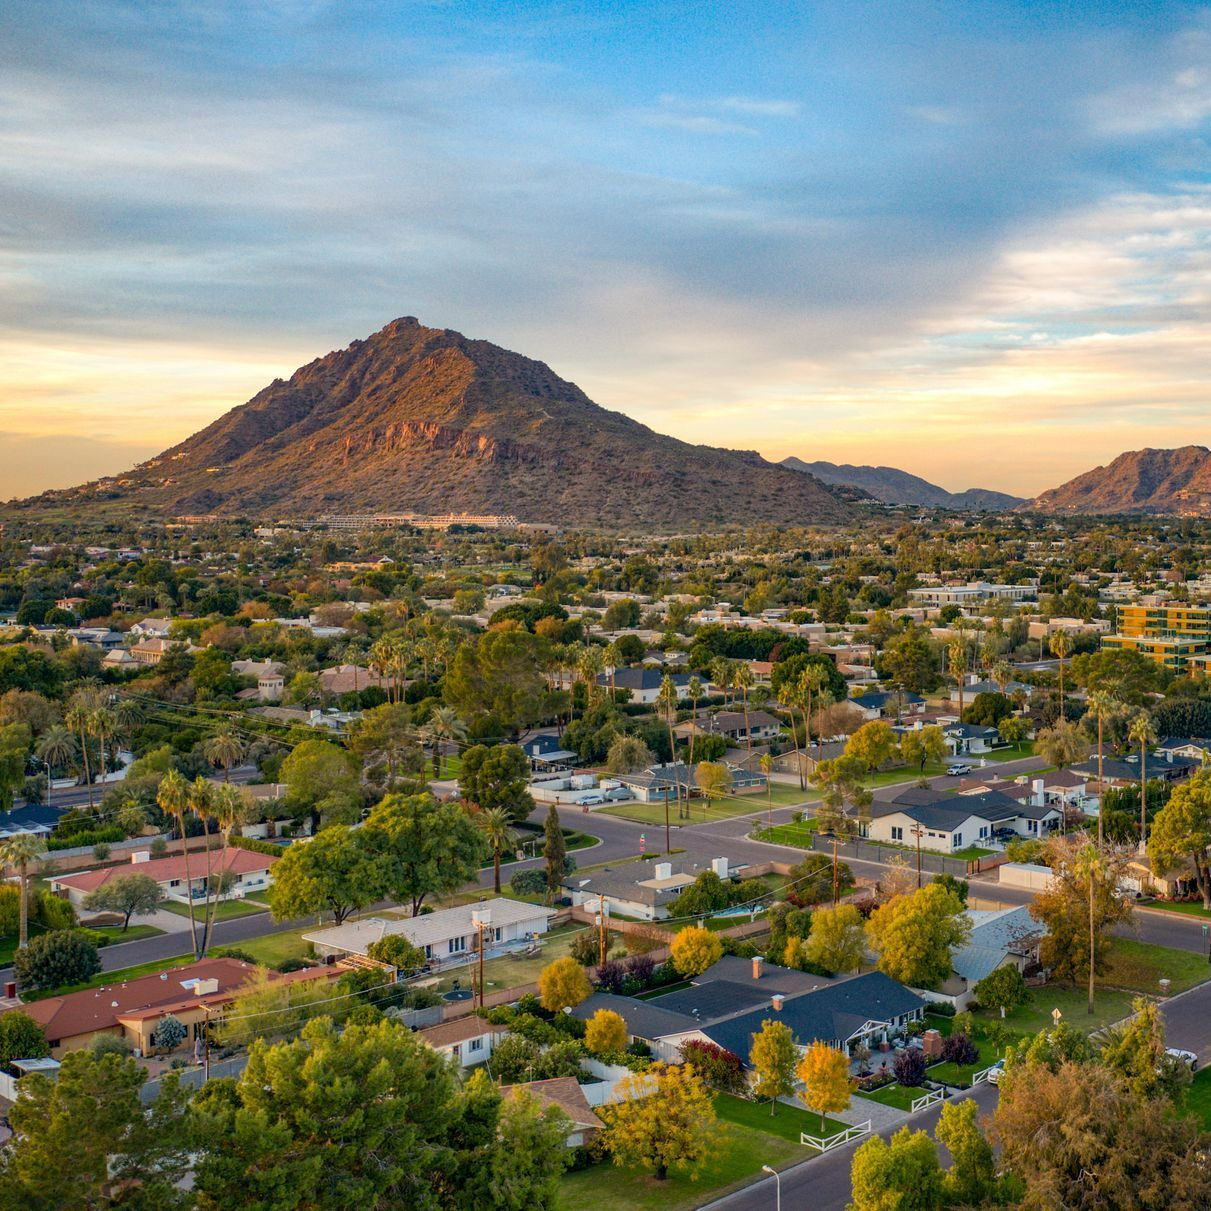 Are you looking to quickly sell your Scottsdale, AZ home? We'll provide you with an offer fast!